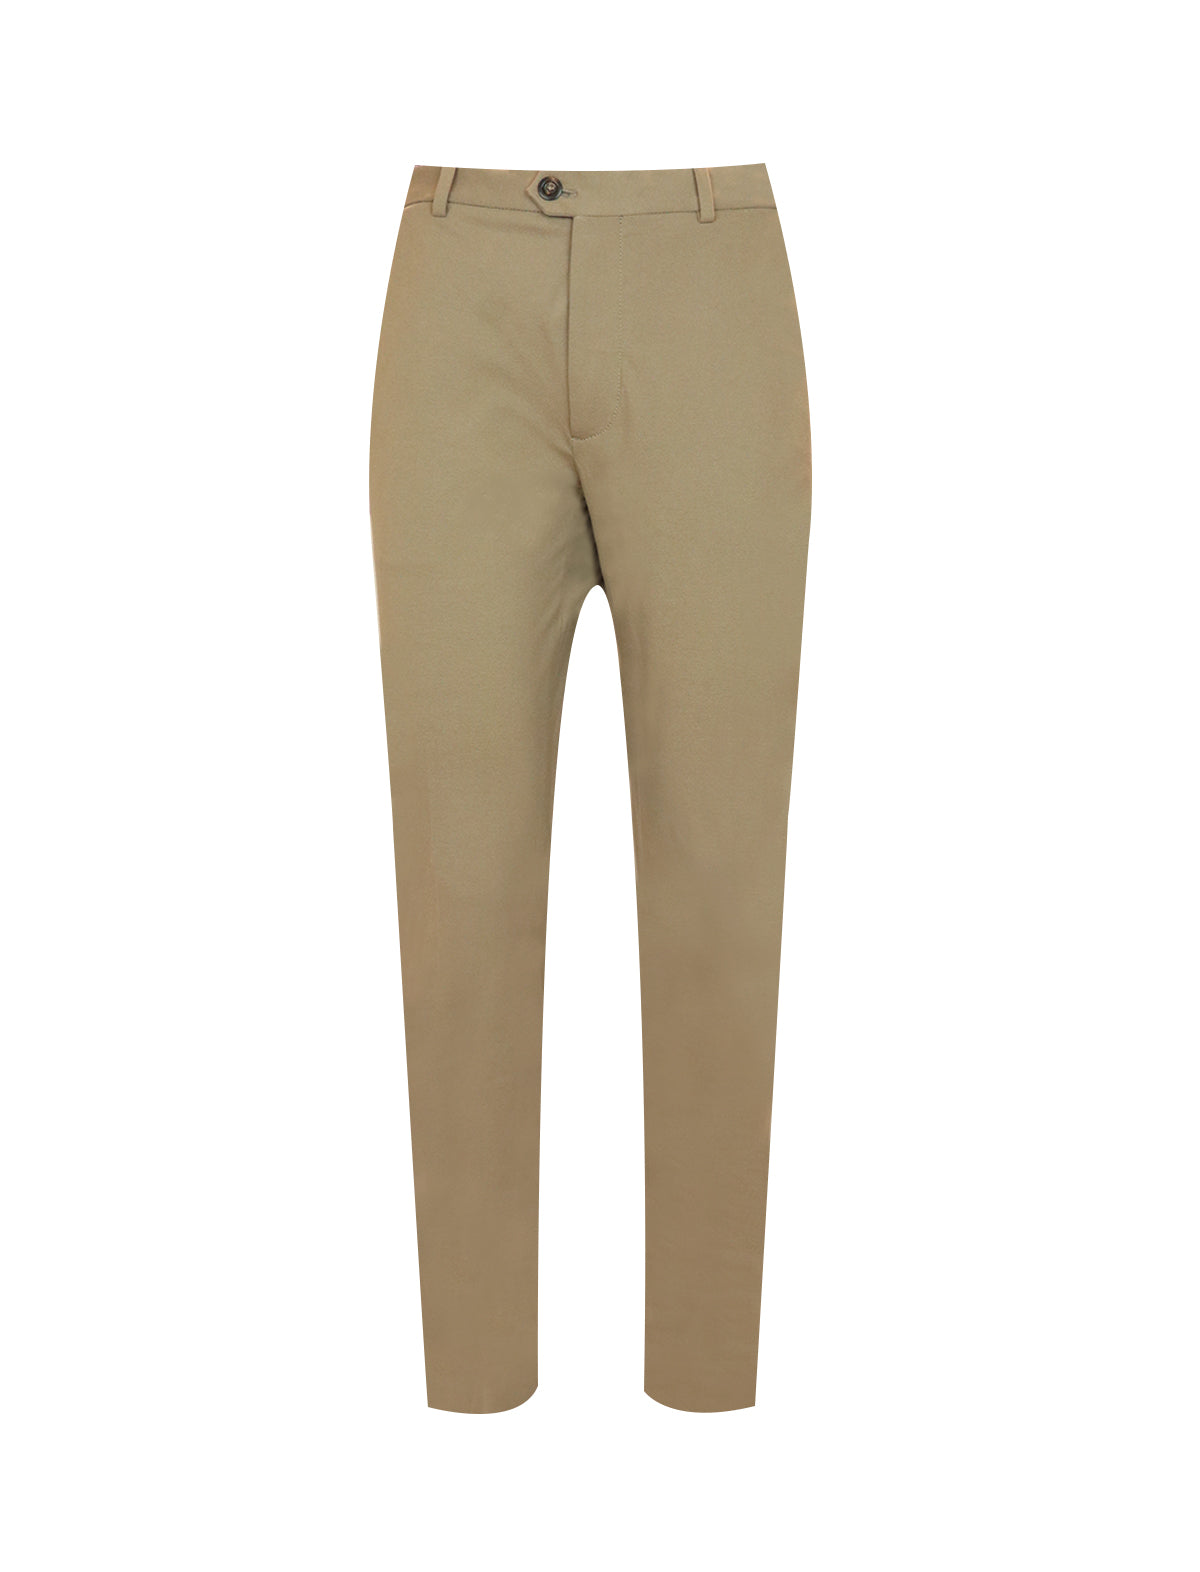 CIRCOLO 1901 Cotton-Blend Tapered Trousers in Haze